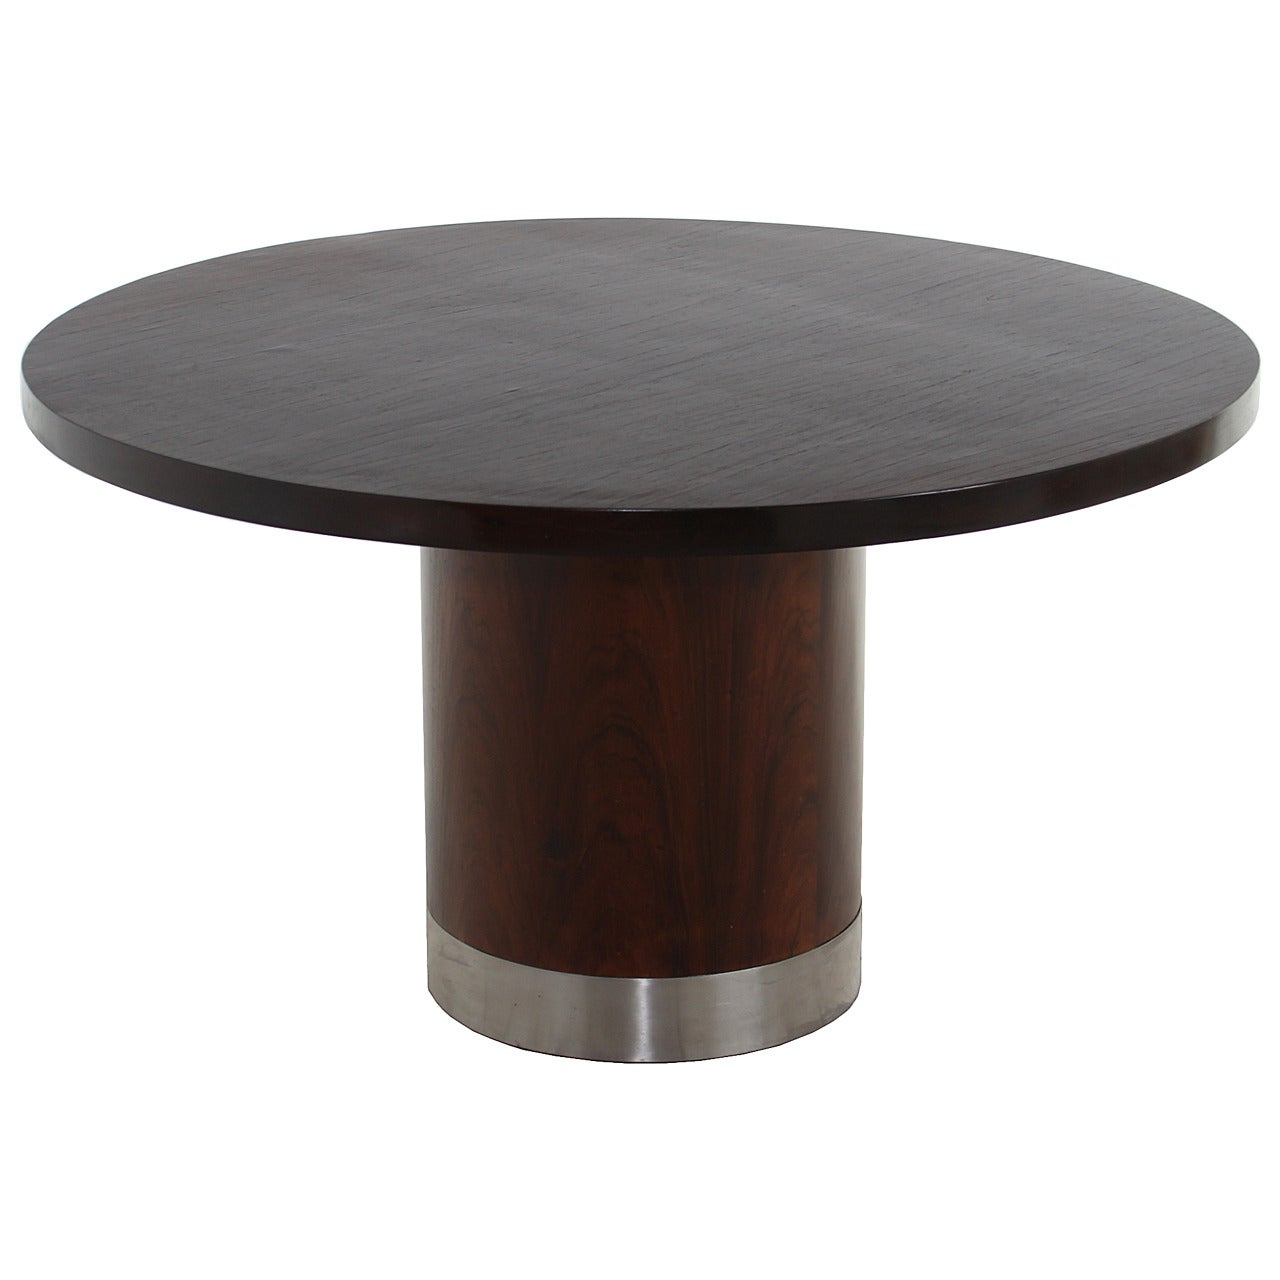 Sergio Rodrigues Mid-Century Modern Exotic Dark Grain Wood Dining Table For Sale